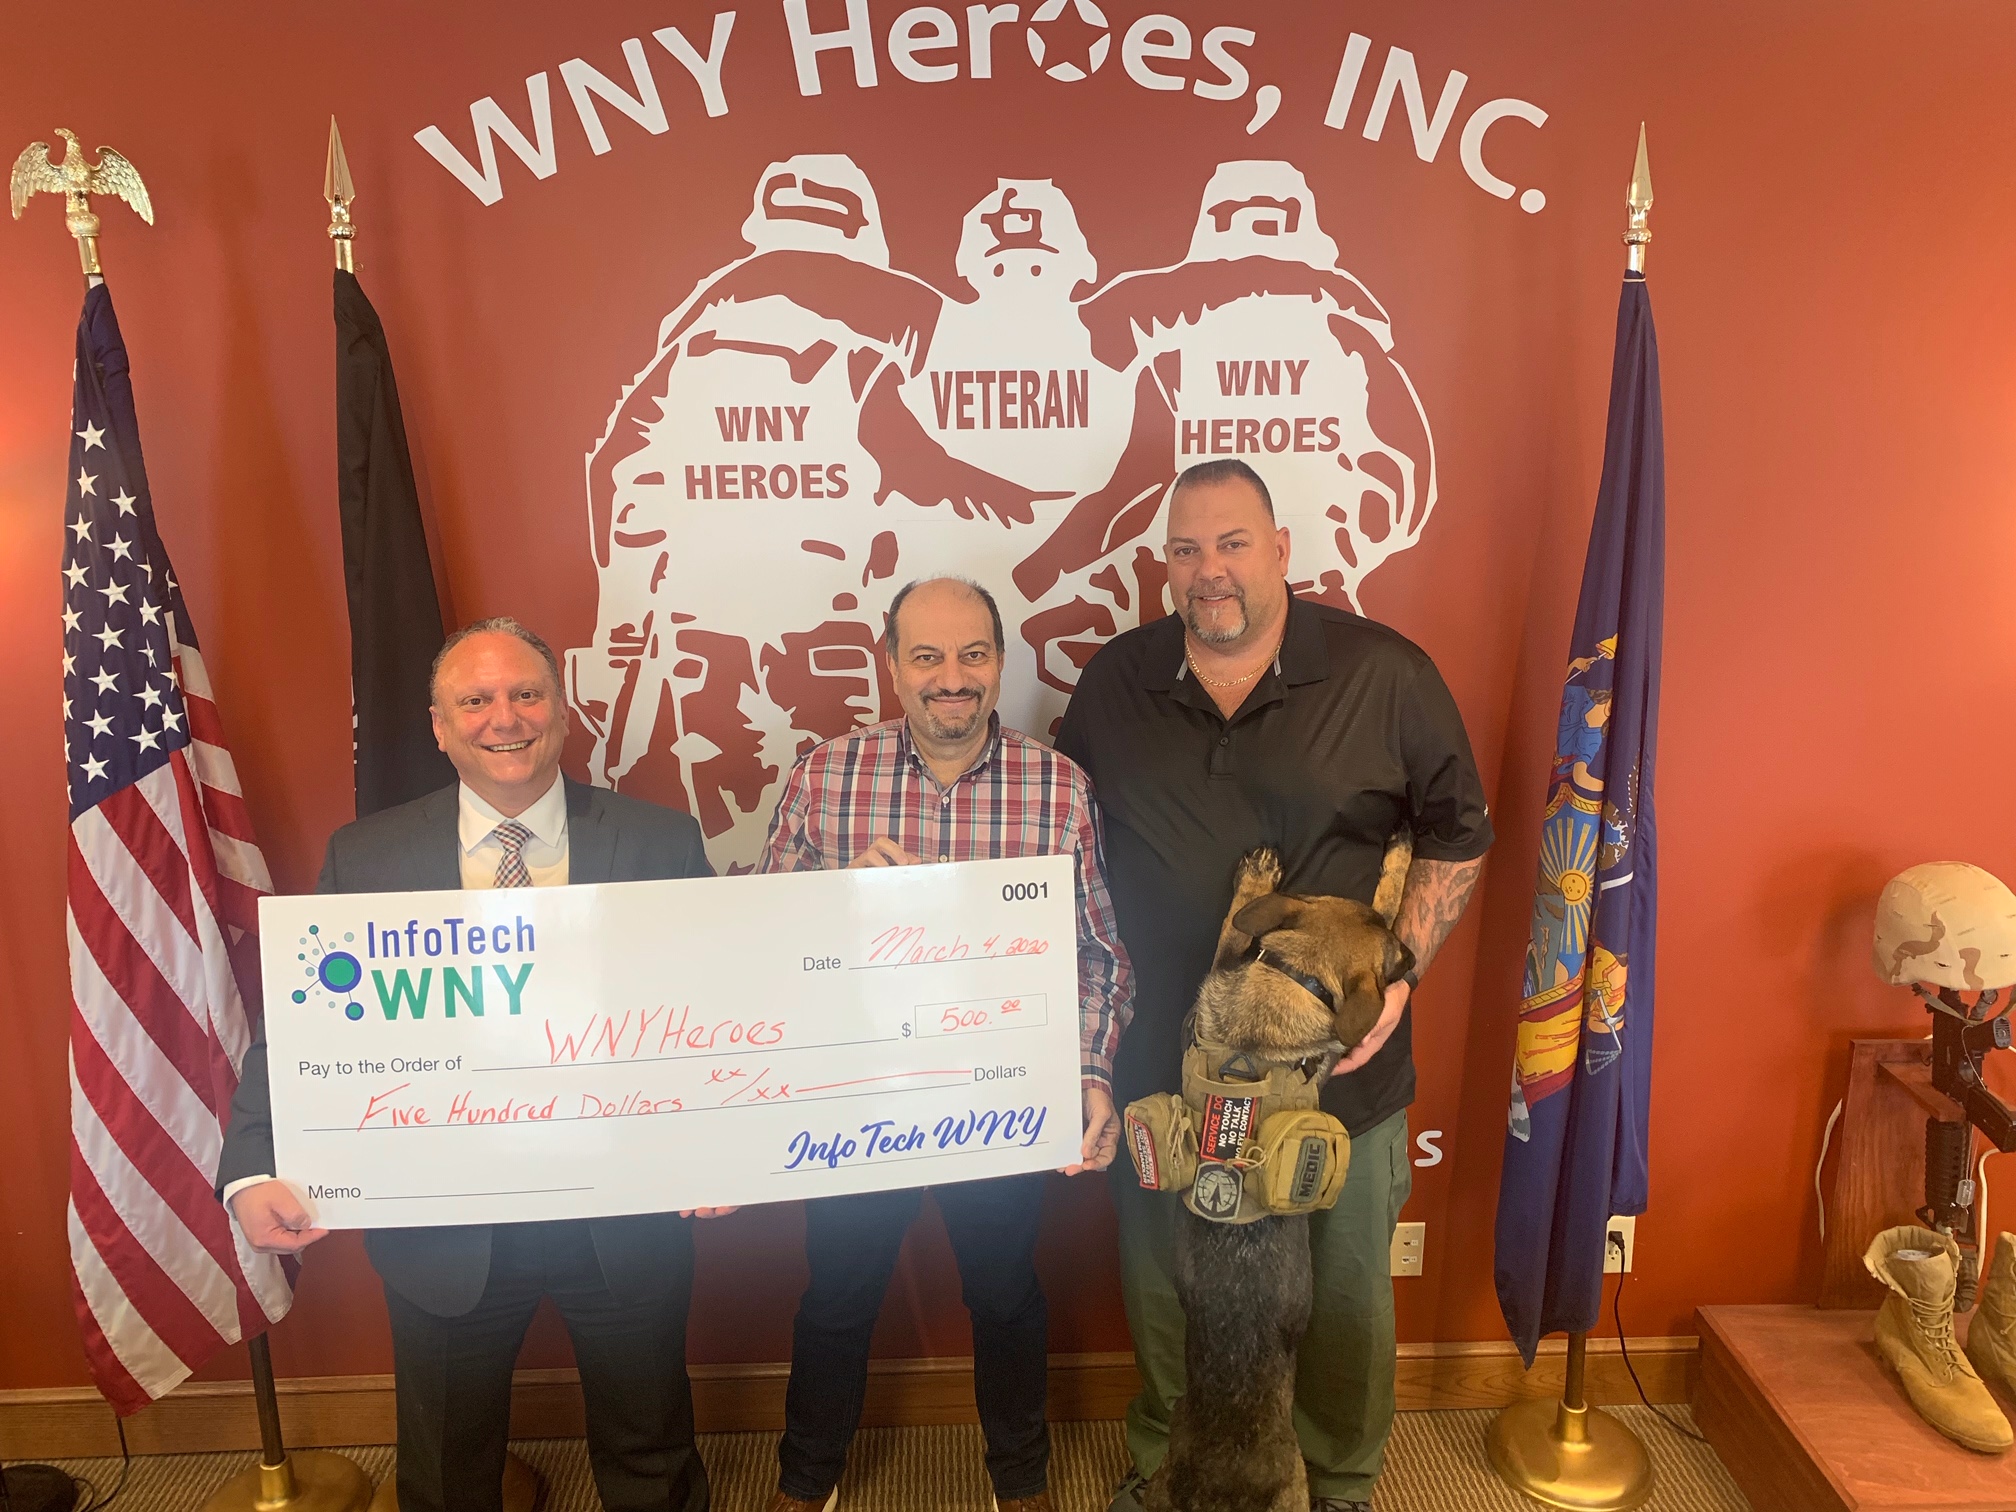 InfoTech WNY supports WNY Heroes Image